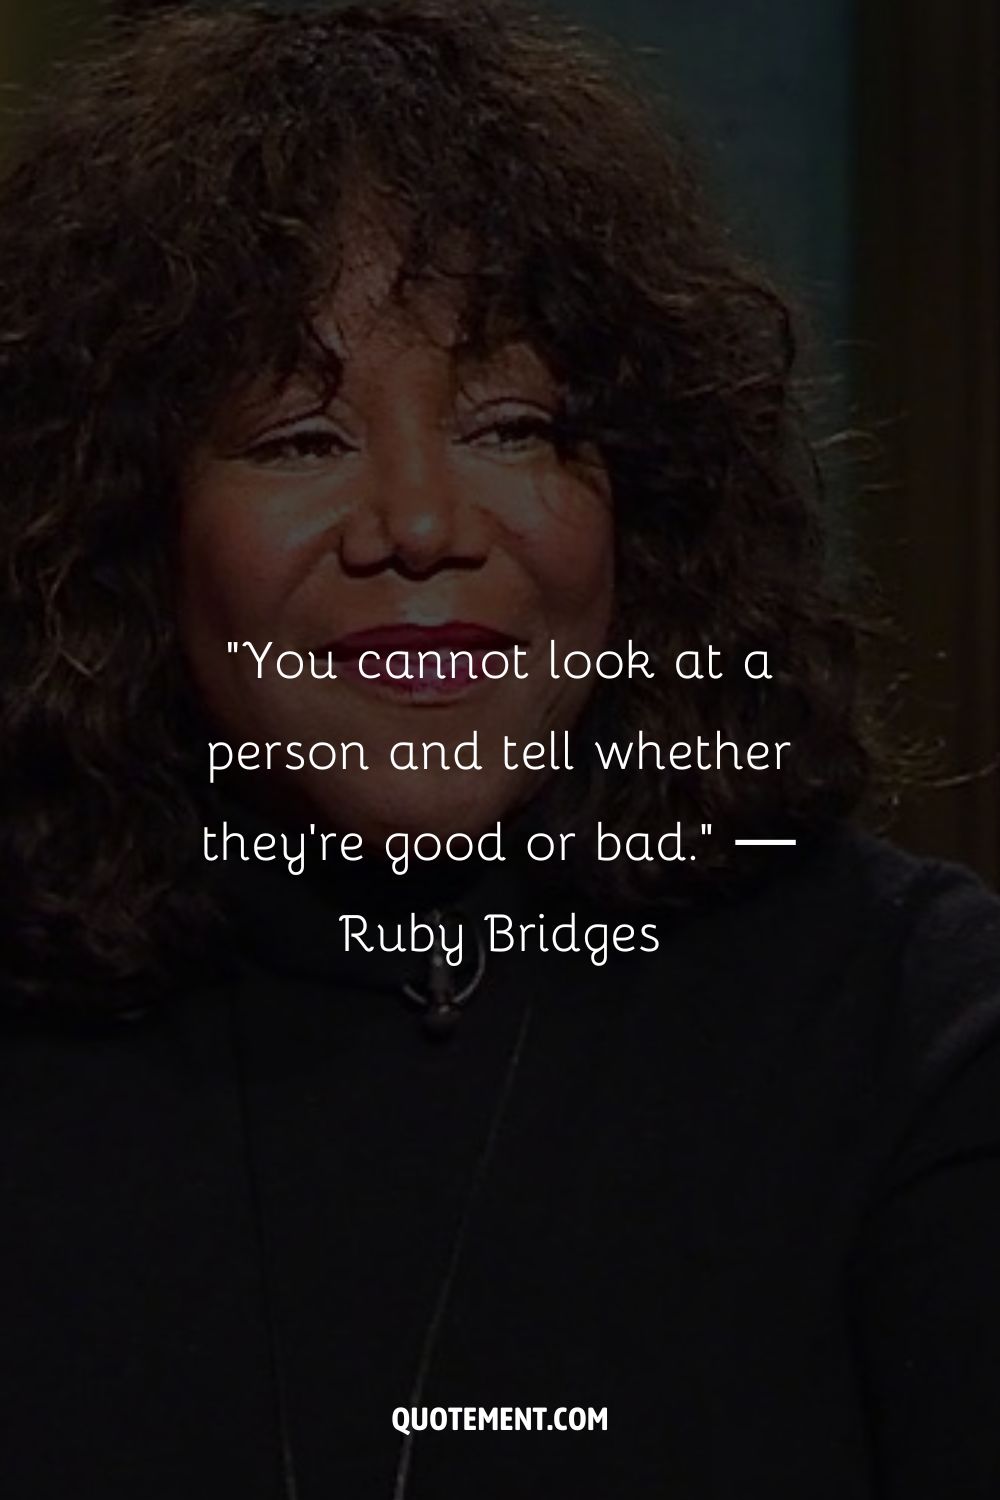 You cannot look at a person and tell whether they're good or bad